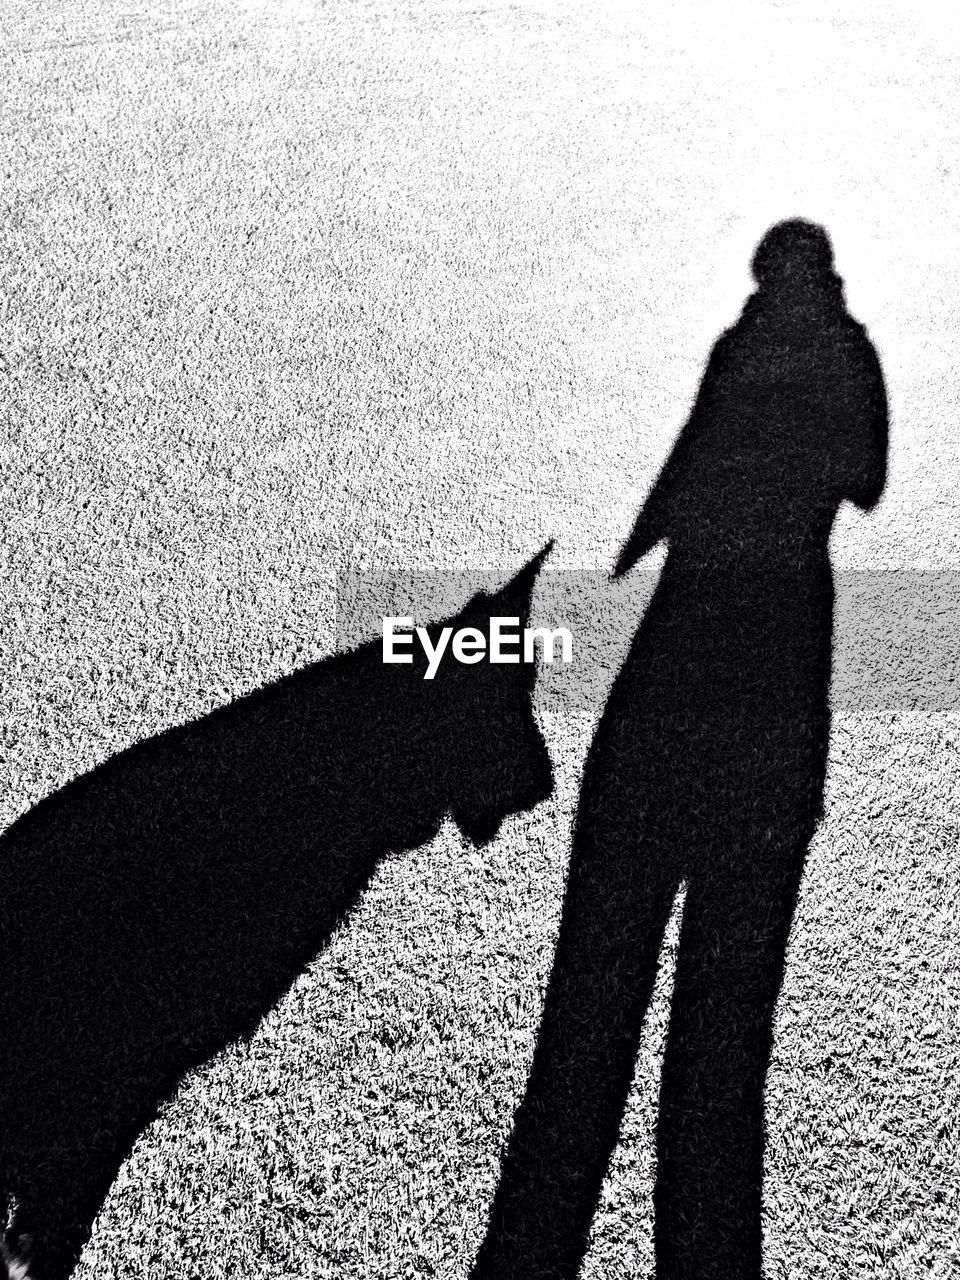 Shadow of man and dog on ground